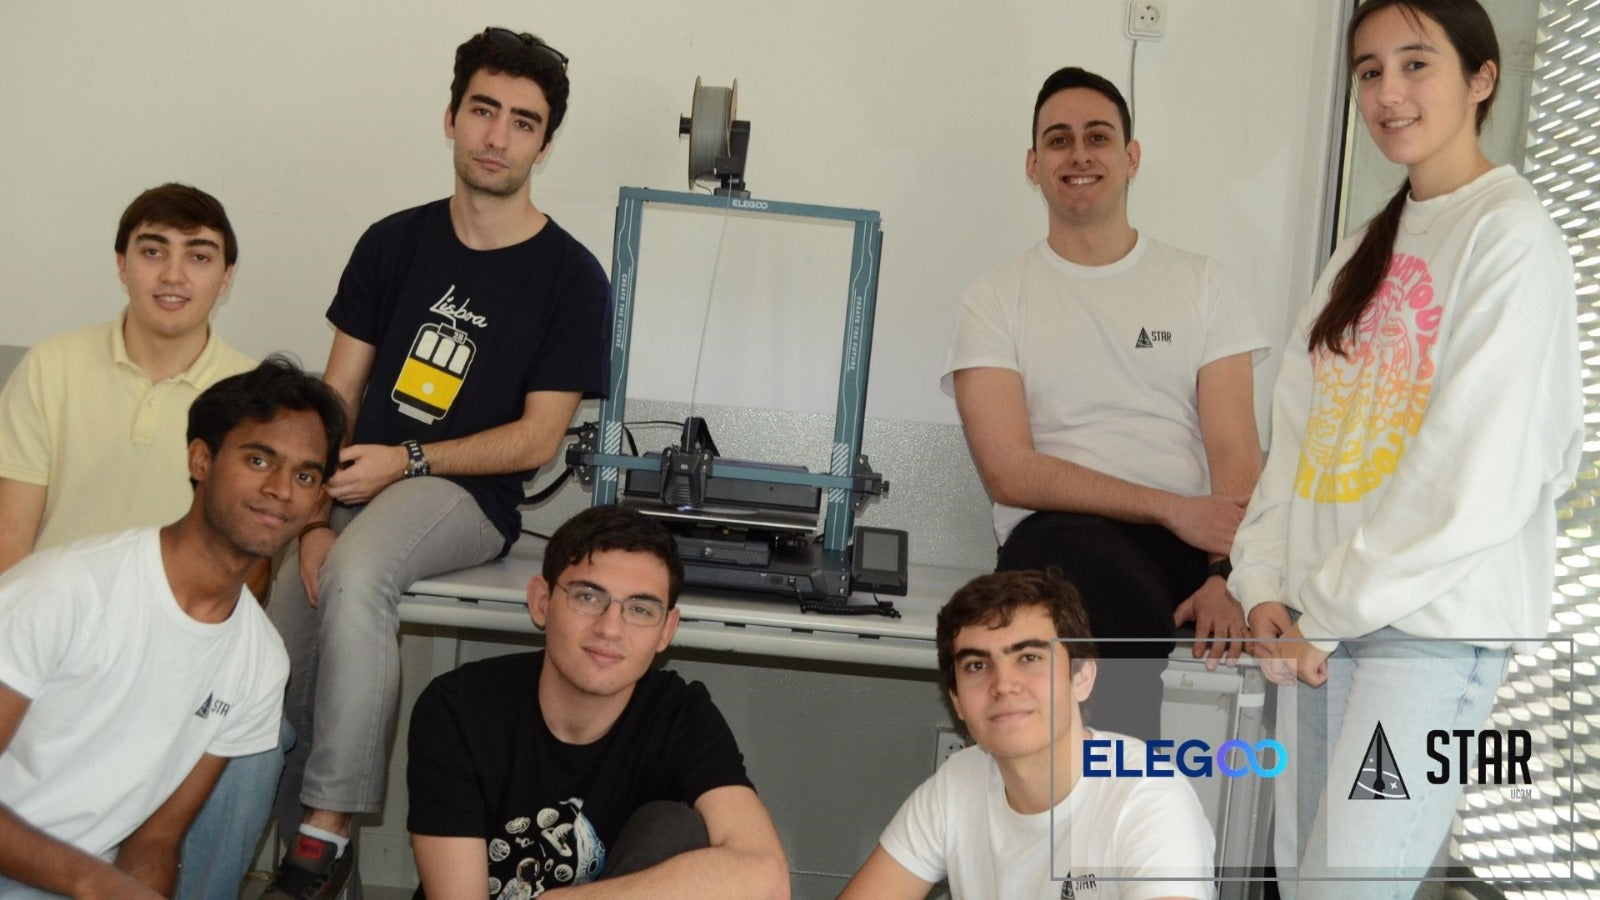 ELEGOO Established Sponsorship with UniCa Sailing Team of the University of Cagliari in Italy